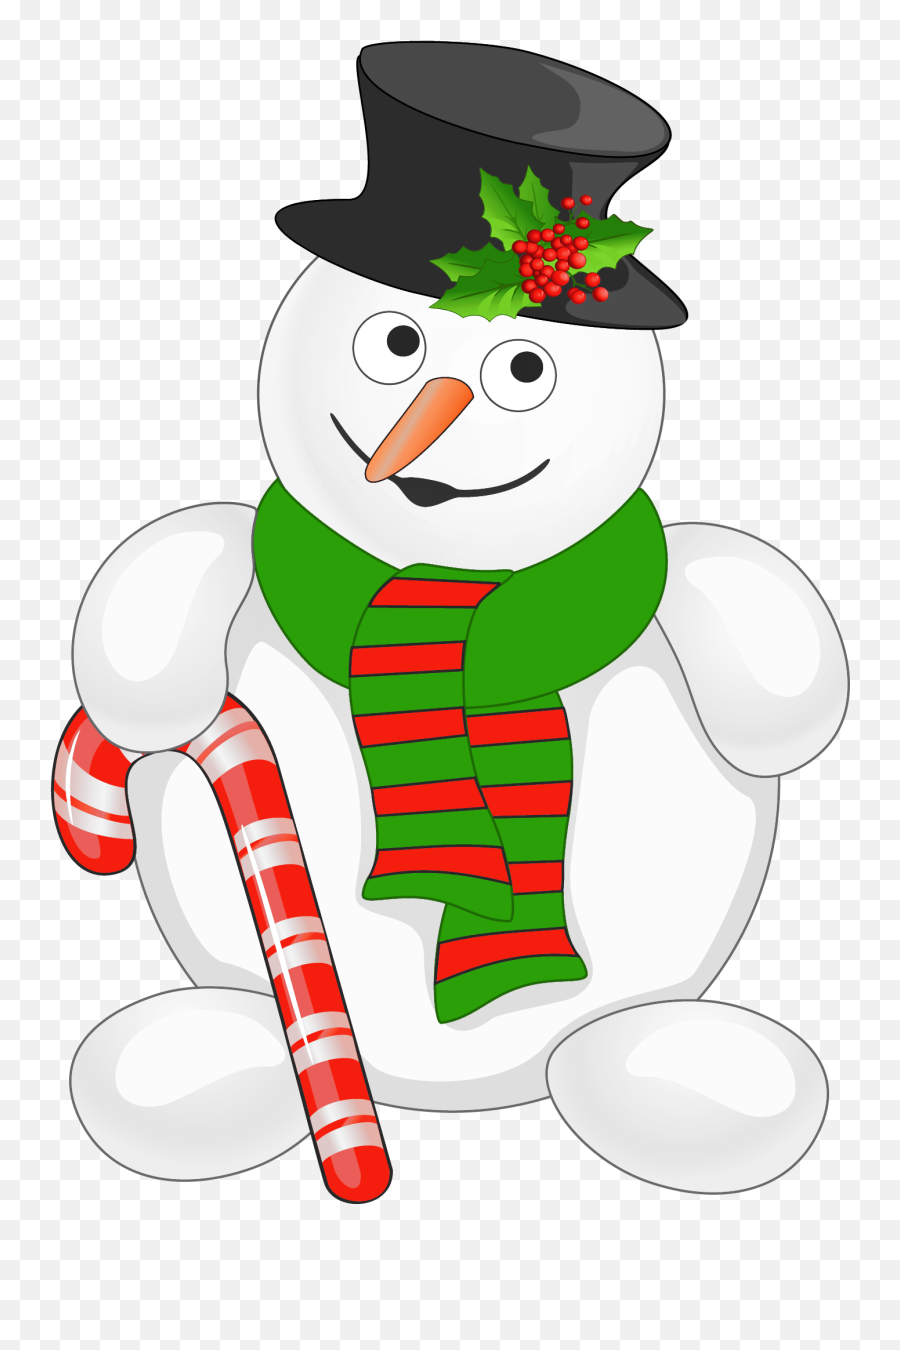 Wishing All My Facebook Friends A Merry Christmas - Clip Art Candy Canes And Snowmen Emoji,Snowman Emoticon For Facebook